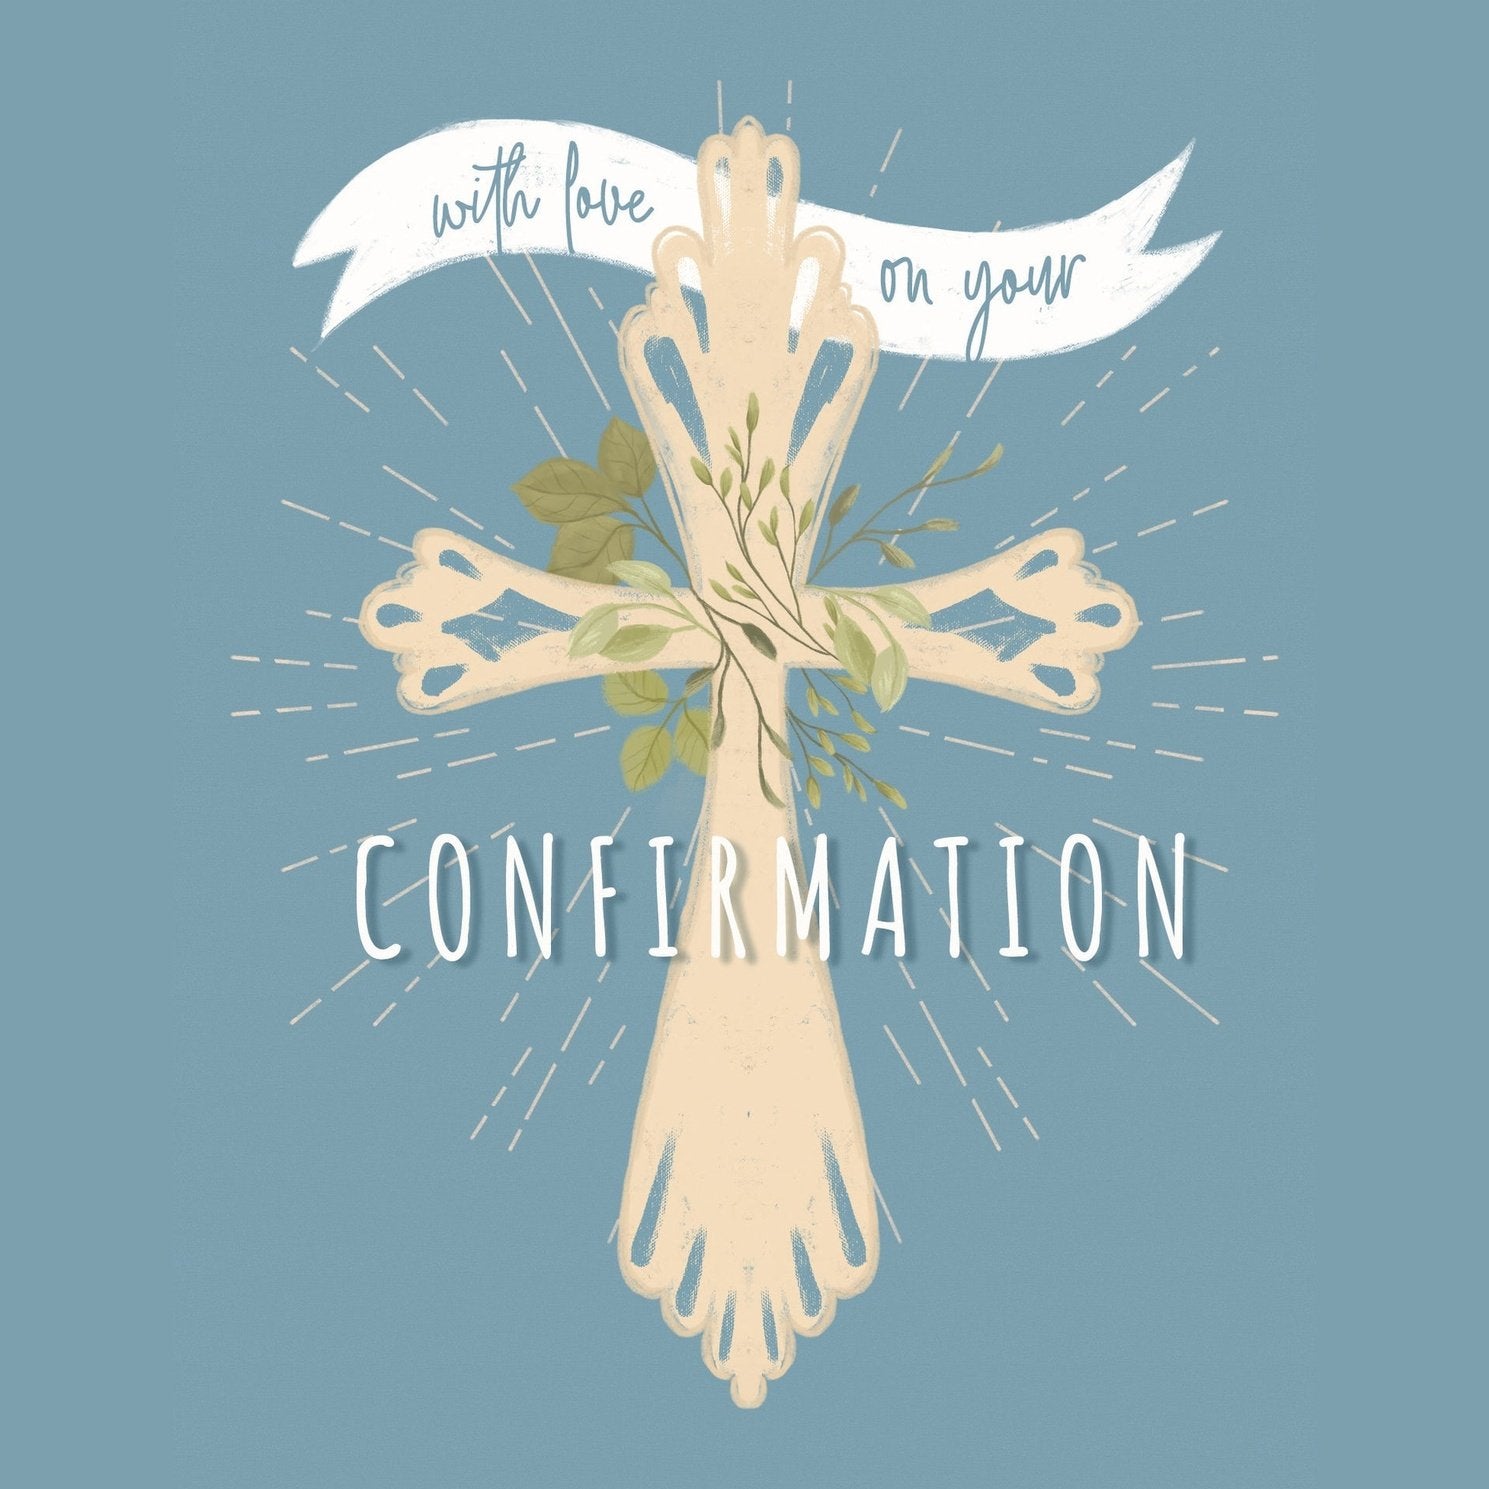 Confirmation - Greeting Card - Confirmation